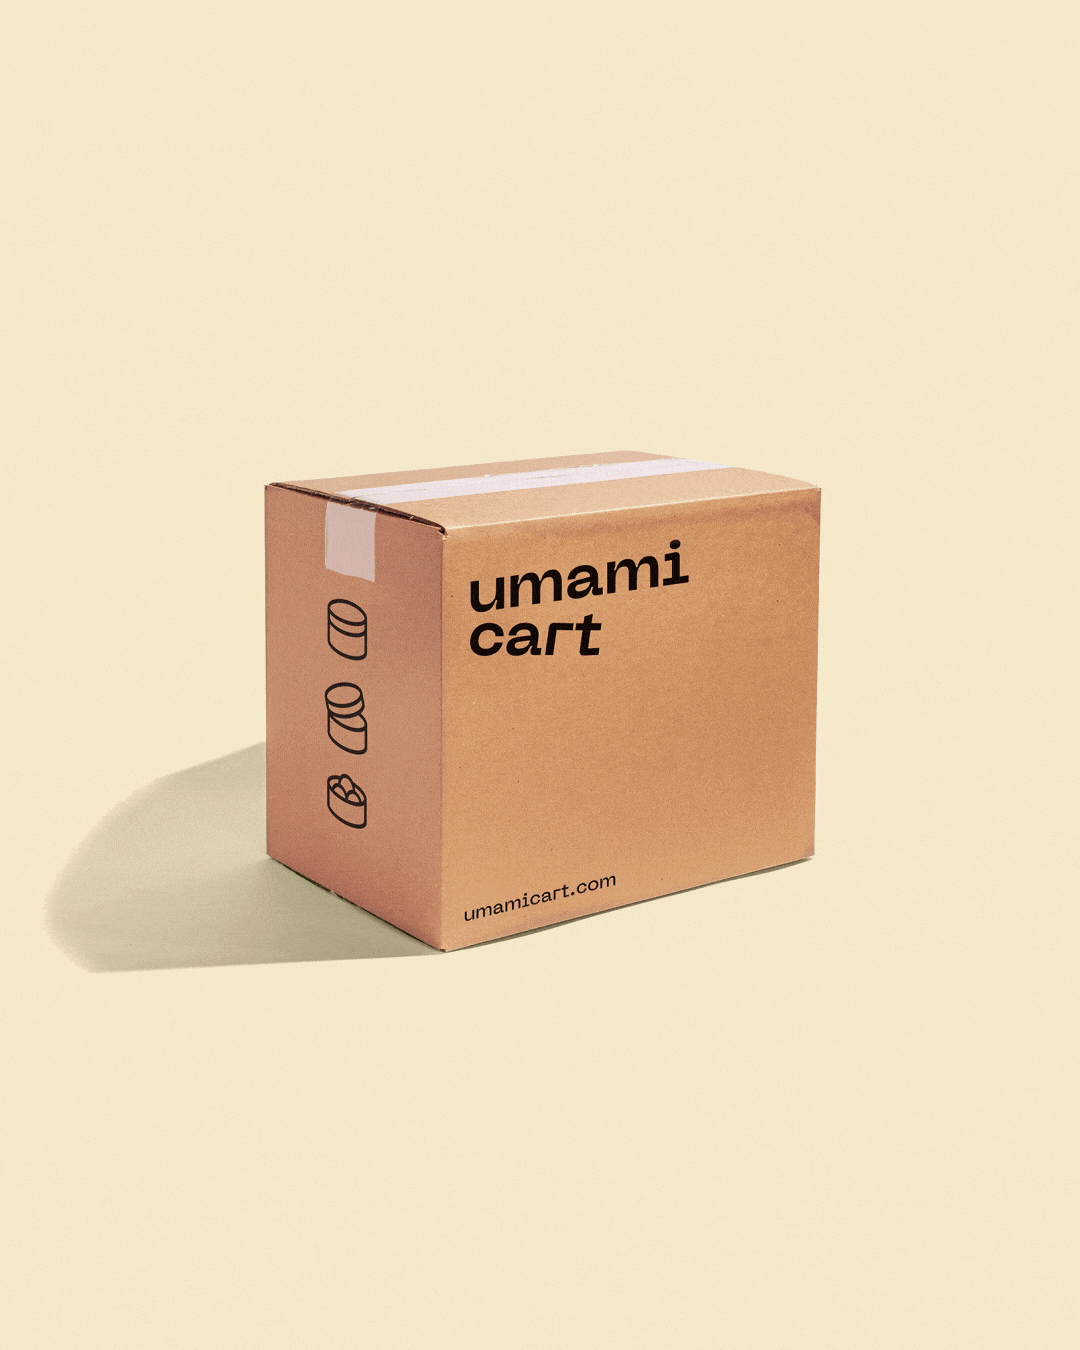 Content creation unboxing GIF for Umamicart